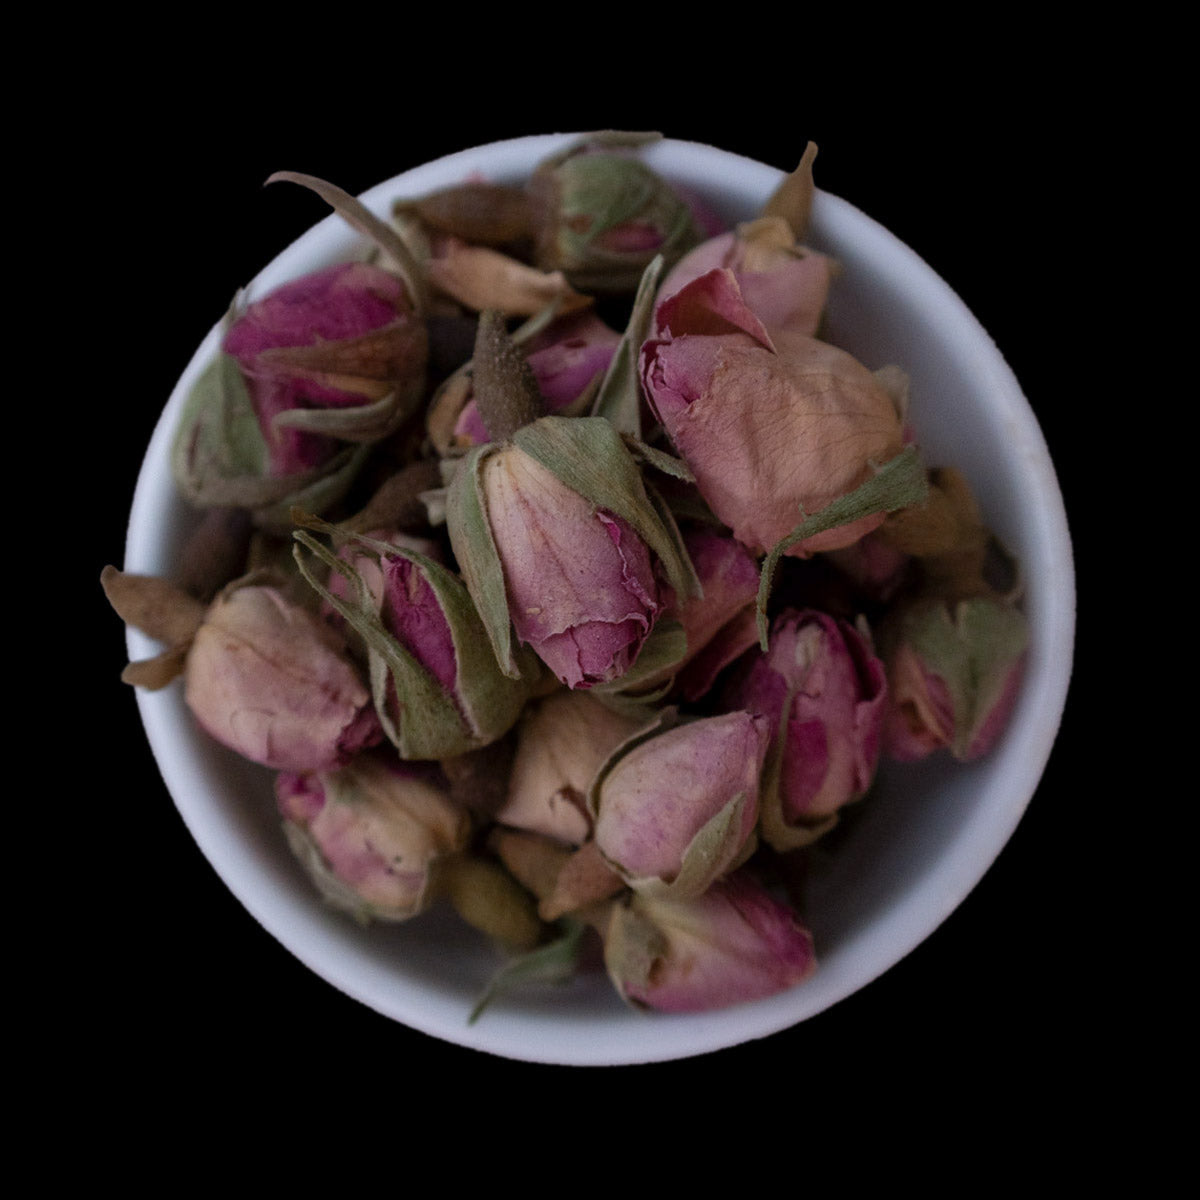 Whole pink rose buds